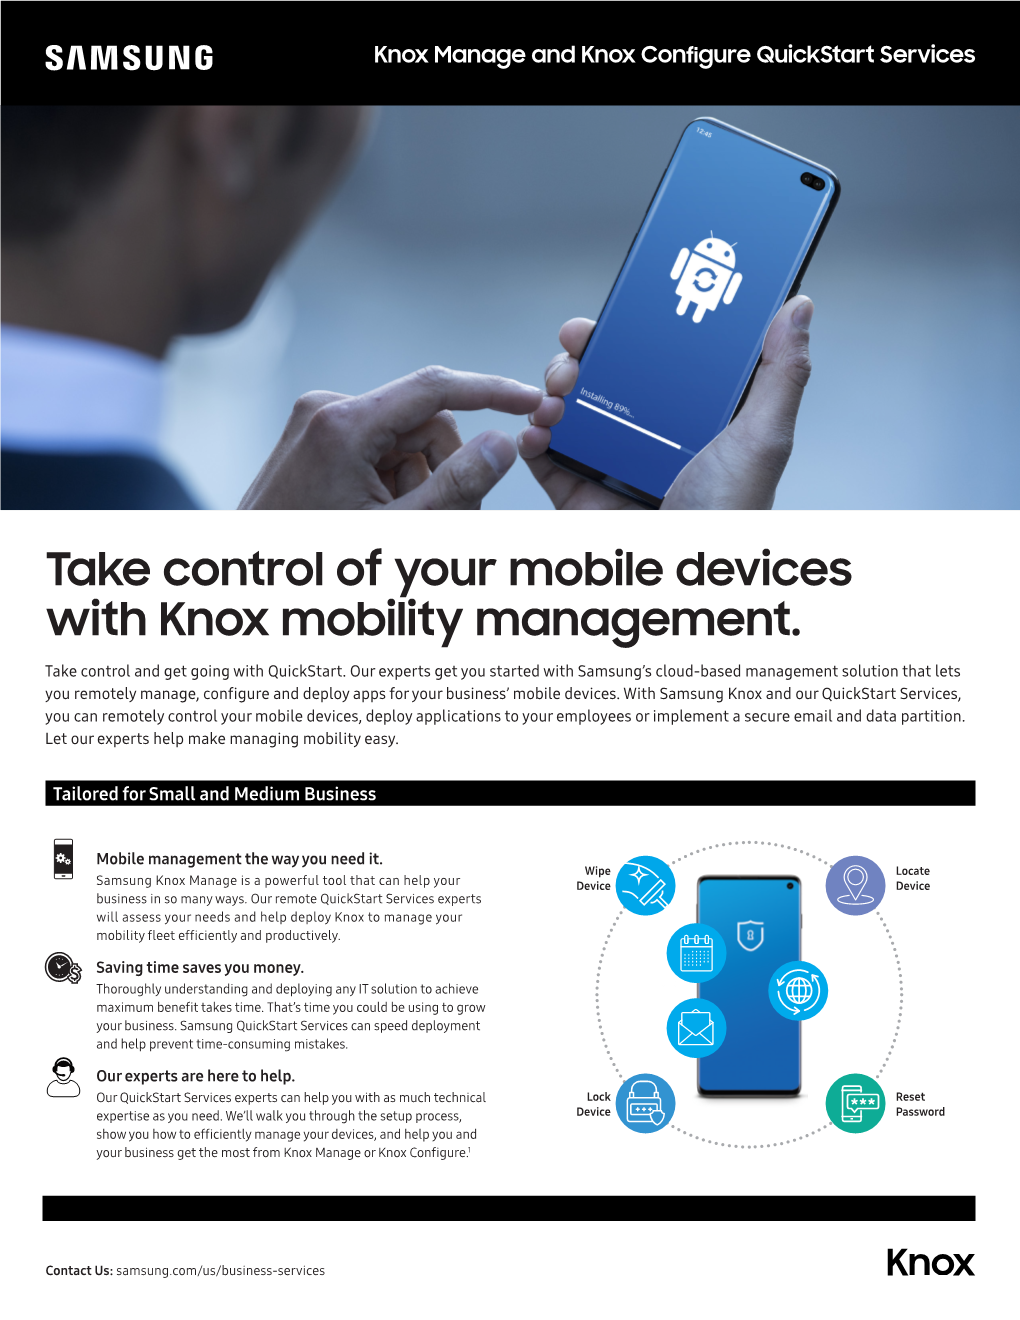 Take Control of Your Mobile Devices with Knox Mobility Management